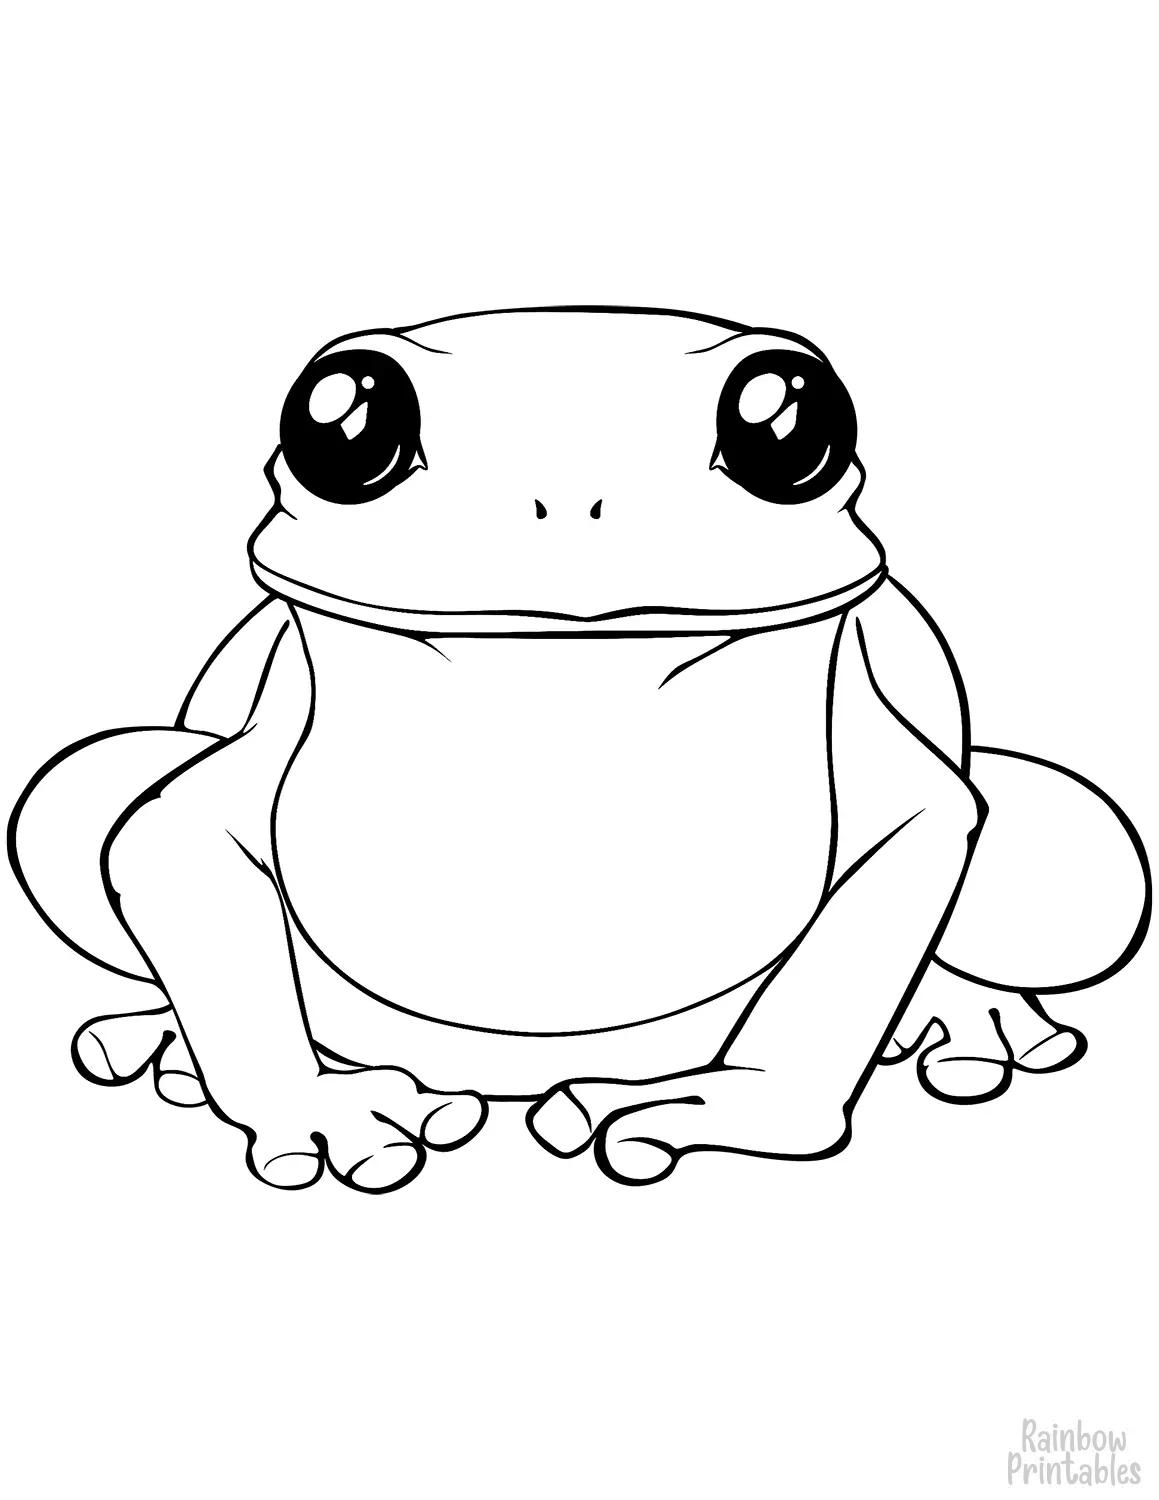 SIMPLE-EASY-line-drawings-CUTE FROG-coloring-page-for-kids